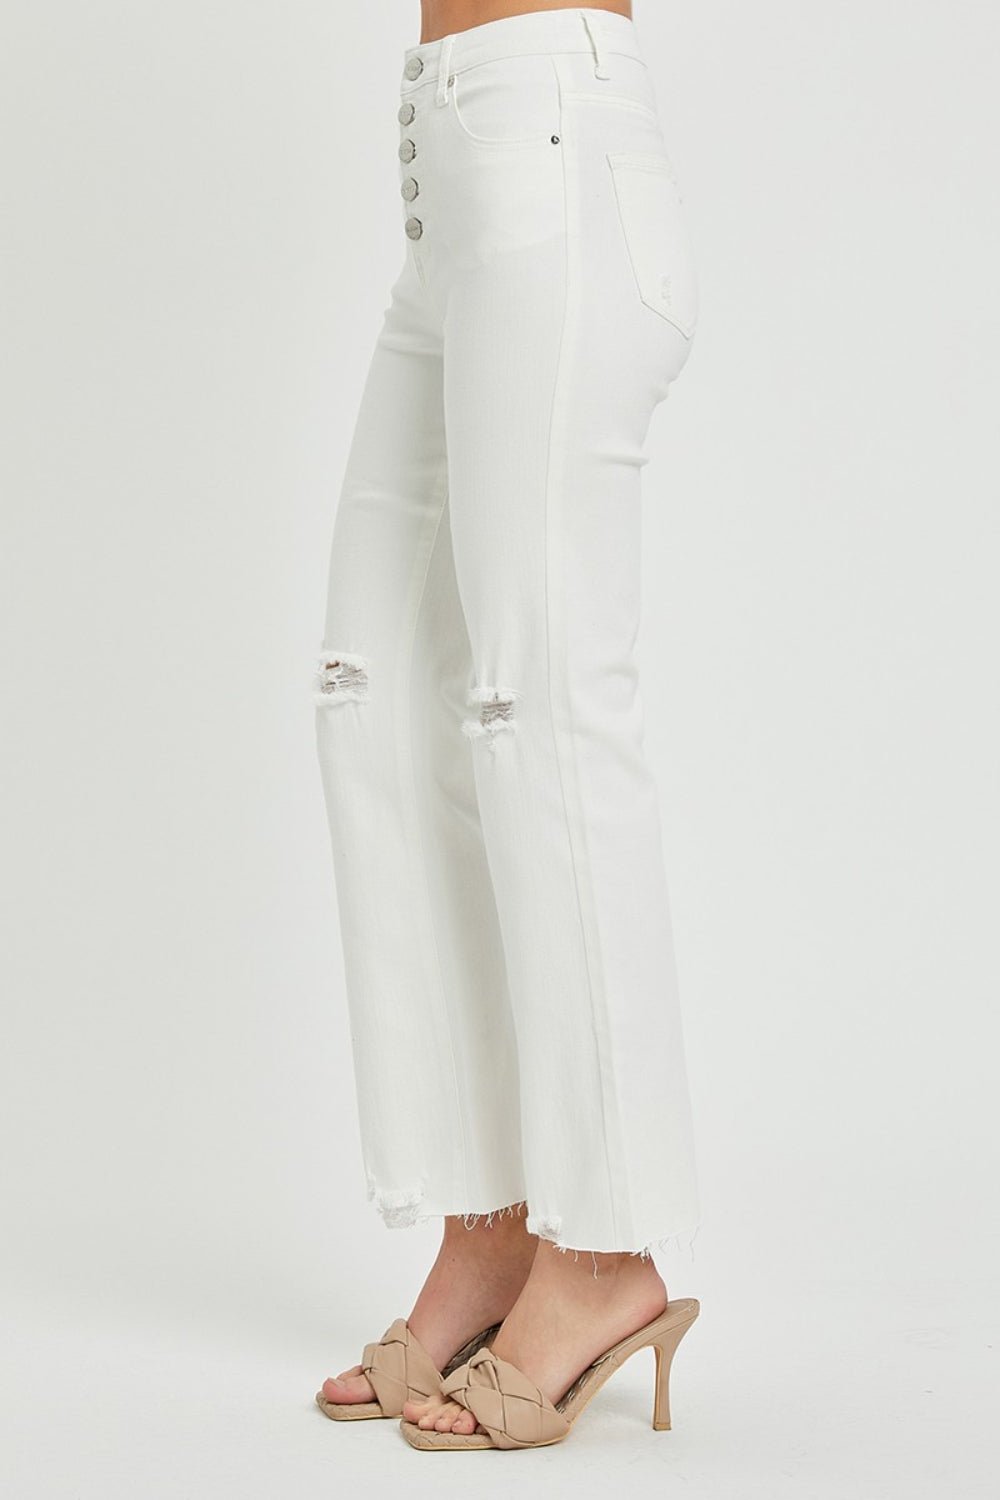 High Rise Button Fly Ankle Jeans in WhiteJeansRISEN